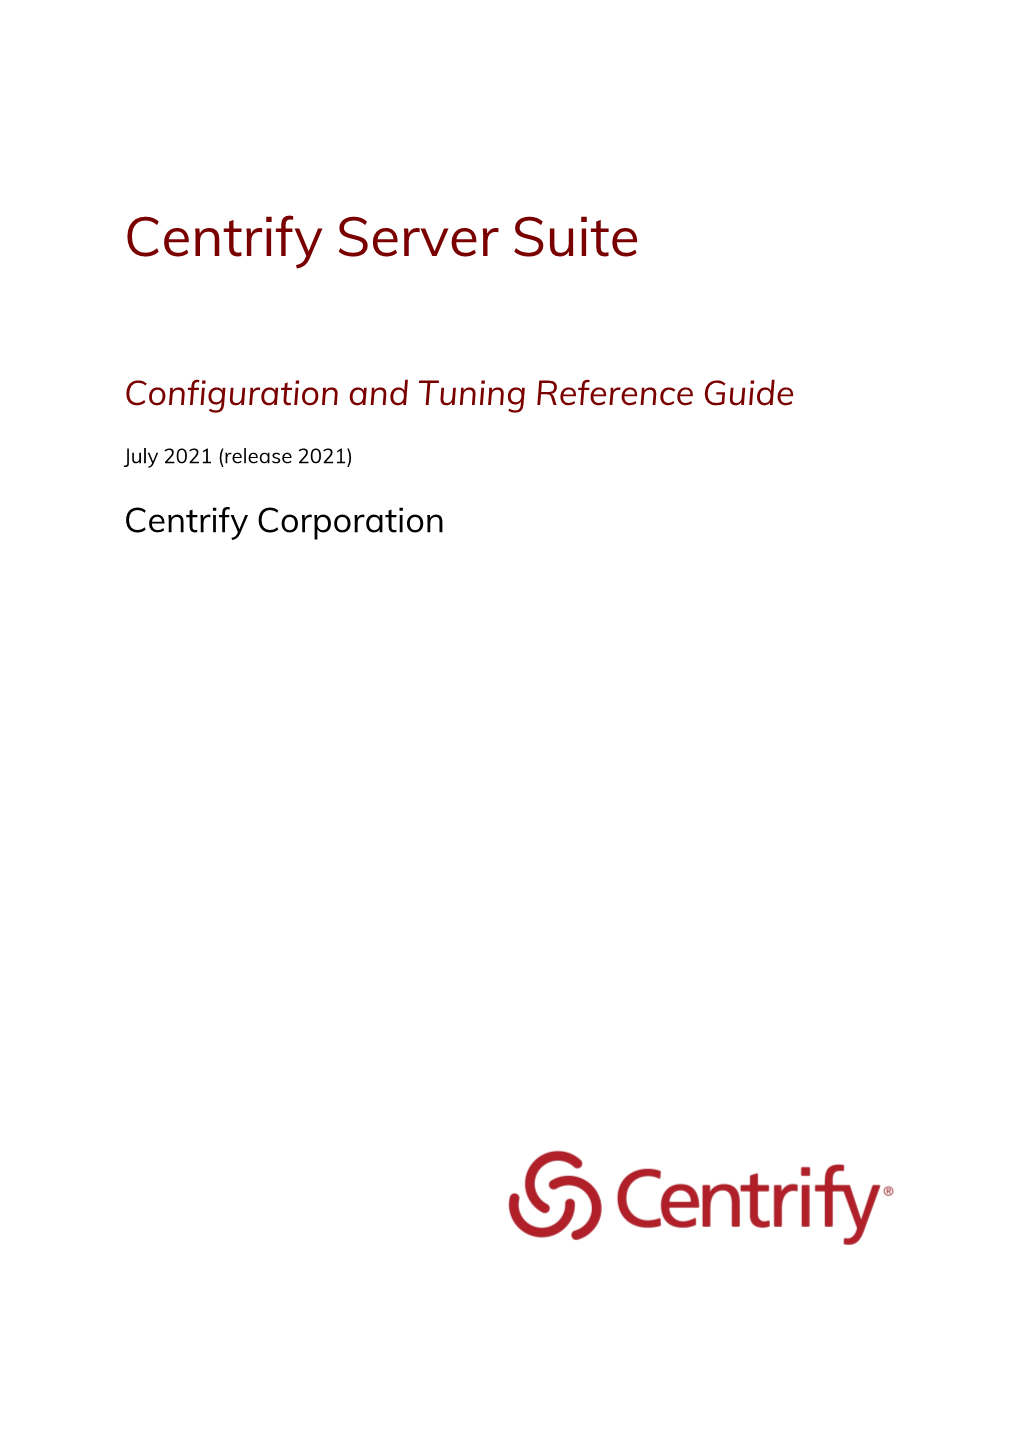 Configuration and Tuning Reference Guide